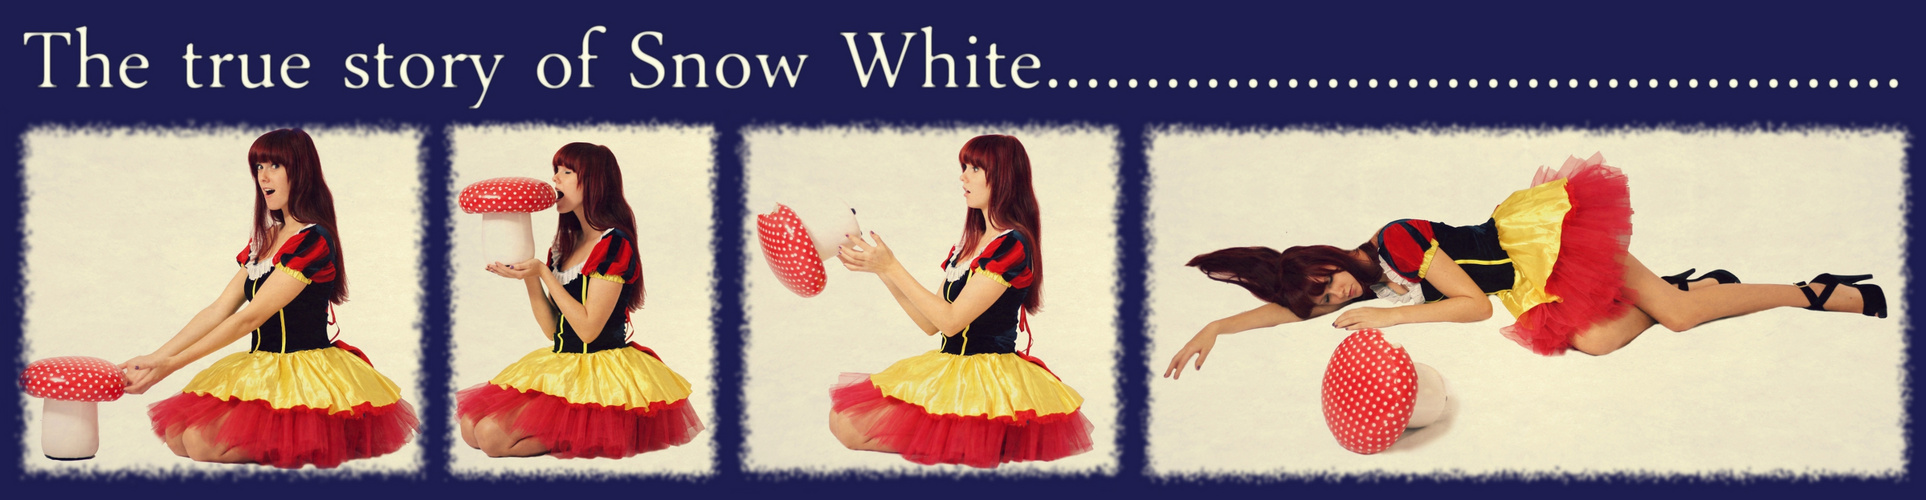 The true story of snow white....